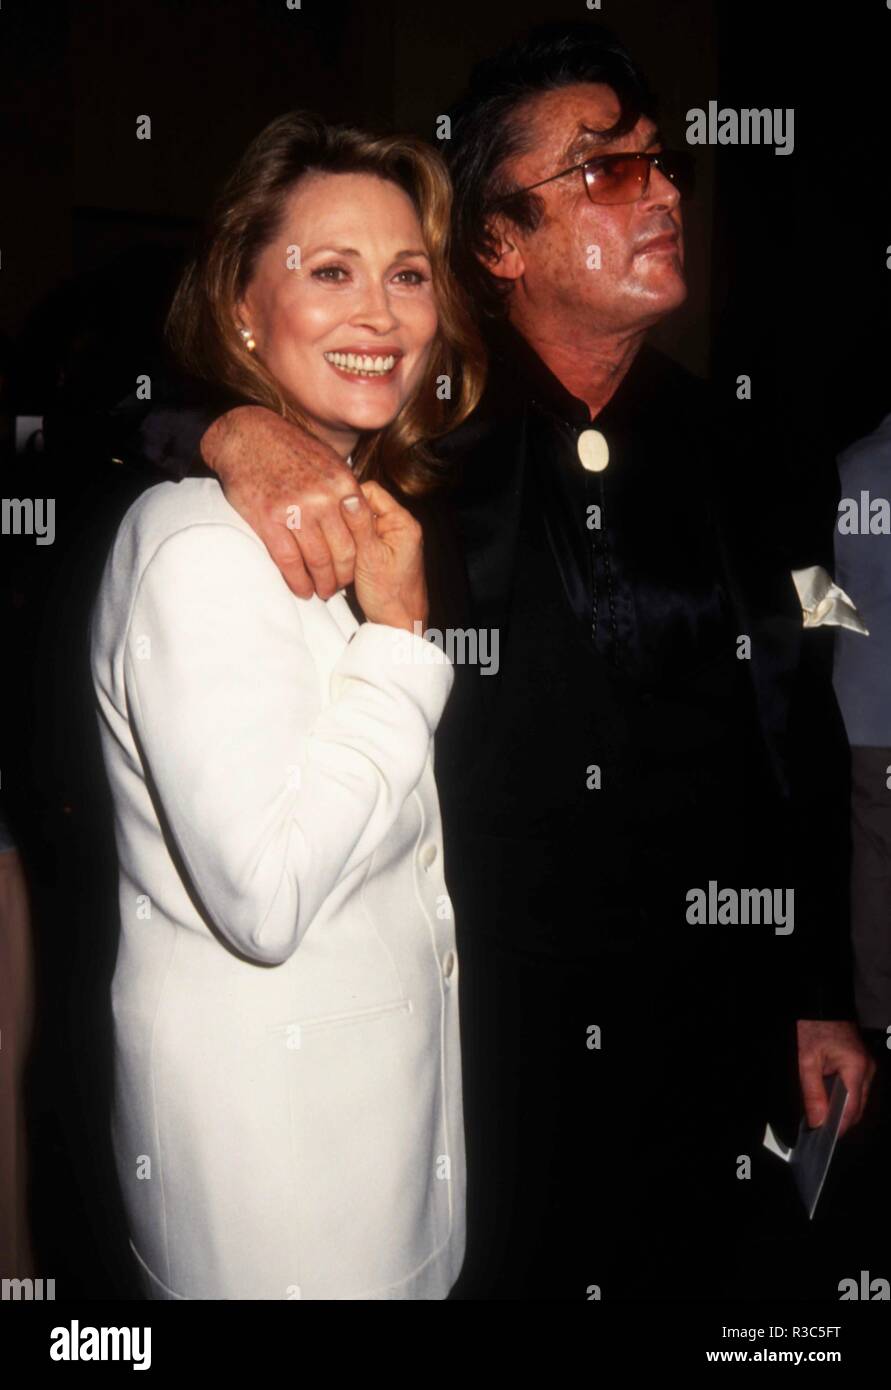 BEVERLY HILLS, CA - JANUARY 29: Actress Faye Dunaway and director Robert Evans attend The Daily Variety Salutes Army Archerd on January 29, 1993 at the Beverly Hilton Hotel in Beverly Hills, California. Photo by Barry King/Alamy Stock Photo Stock Photo